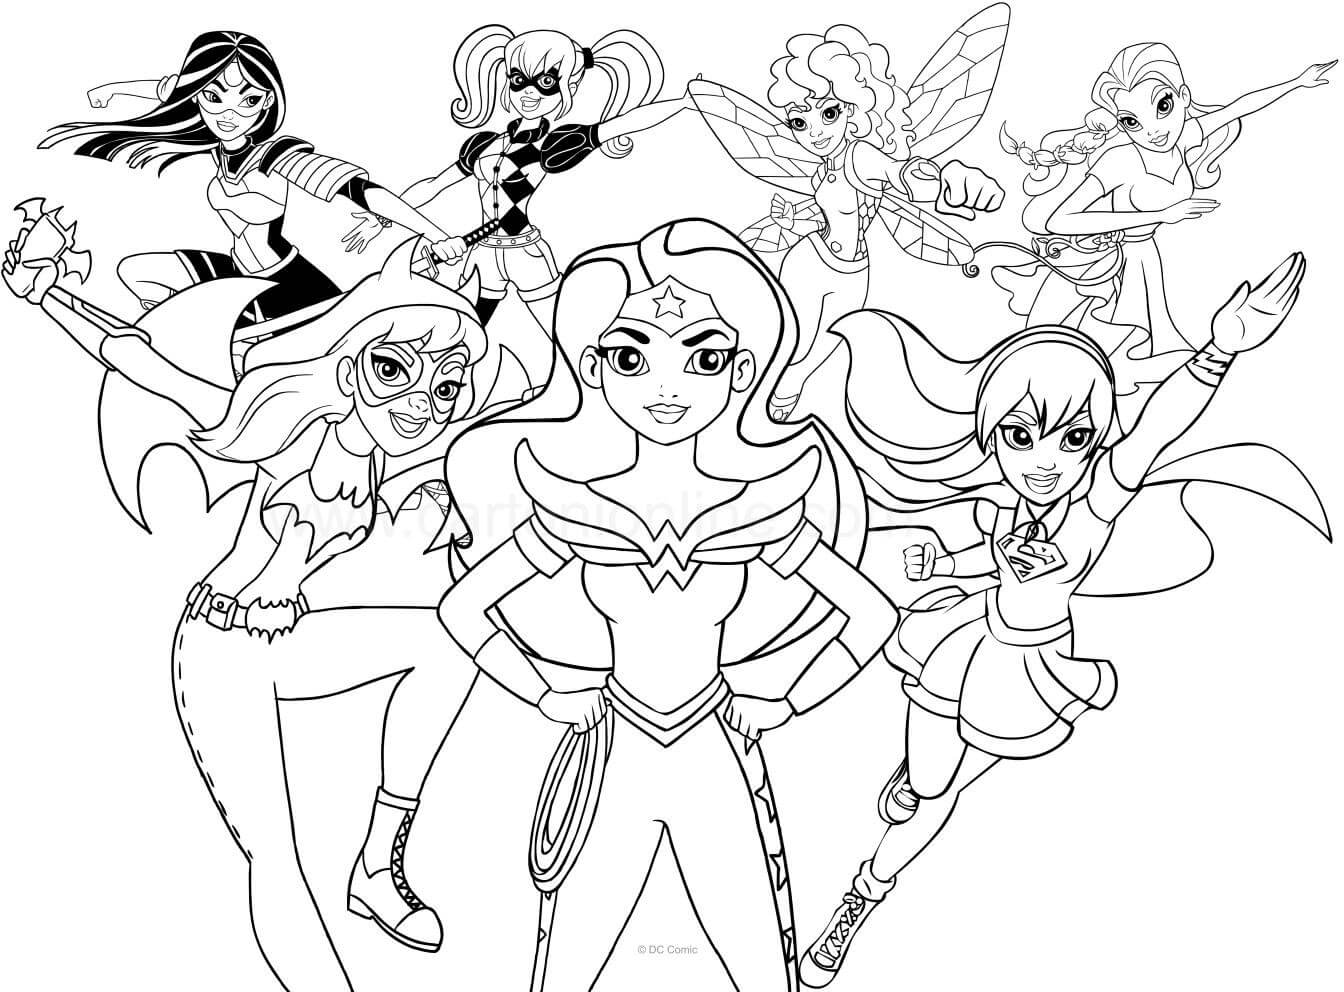 DC Super Hero Girls 2 Coloring Page - Free Printable Coloring Pages for Kids